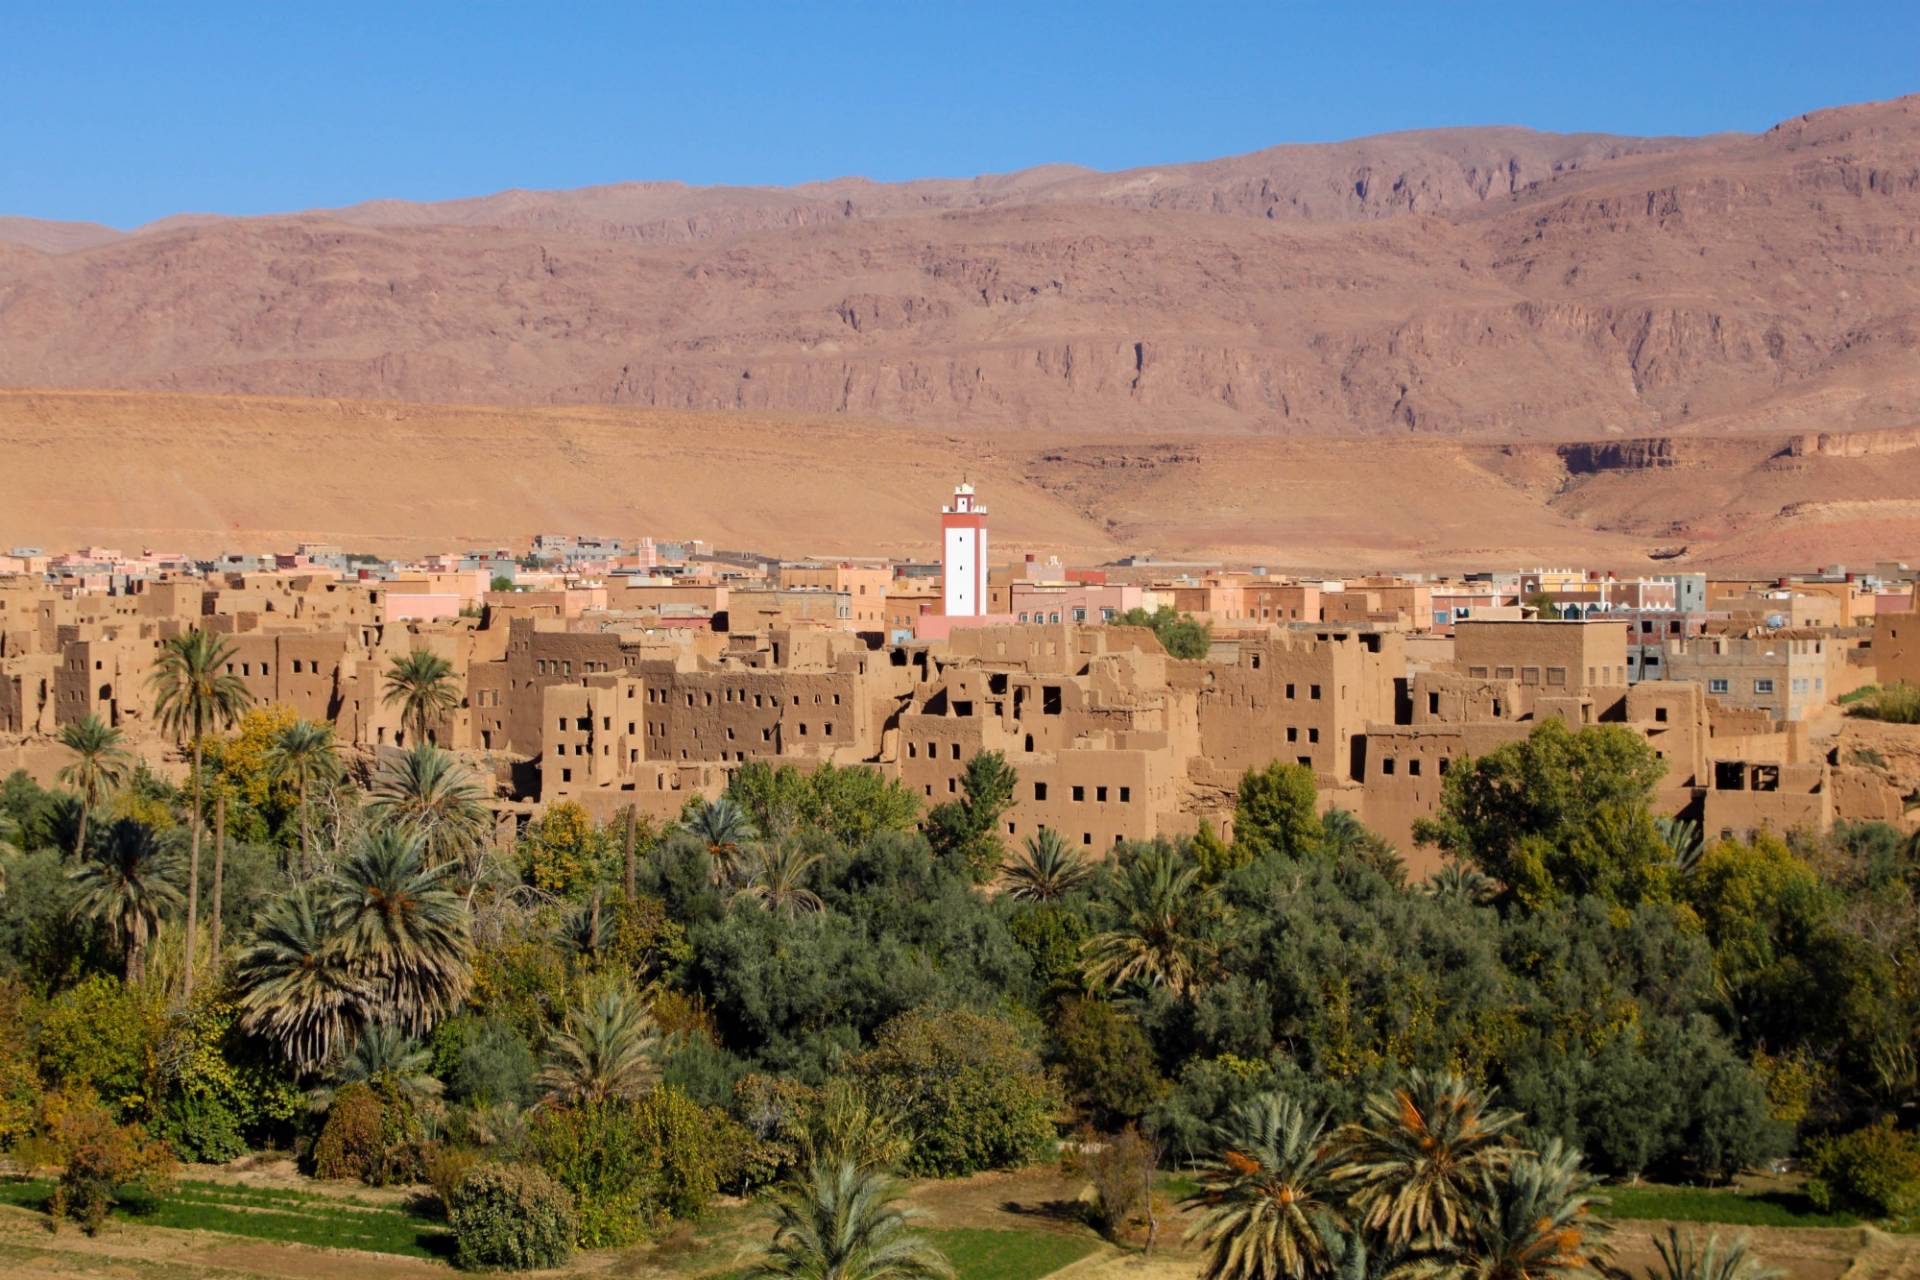 The most beautiful route between Marrakech and Ouarzazate, 3 Days tour from Fes to Marrakech,9 Days Tour from Casablanca around Morocco